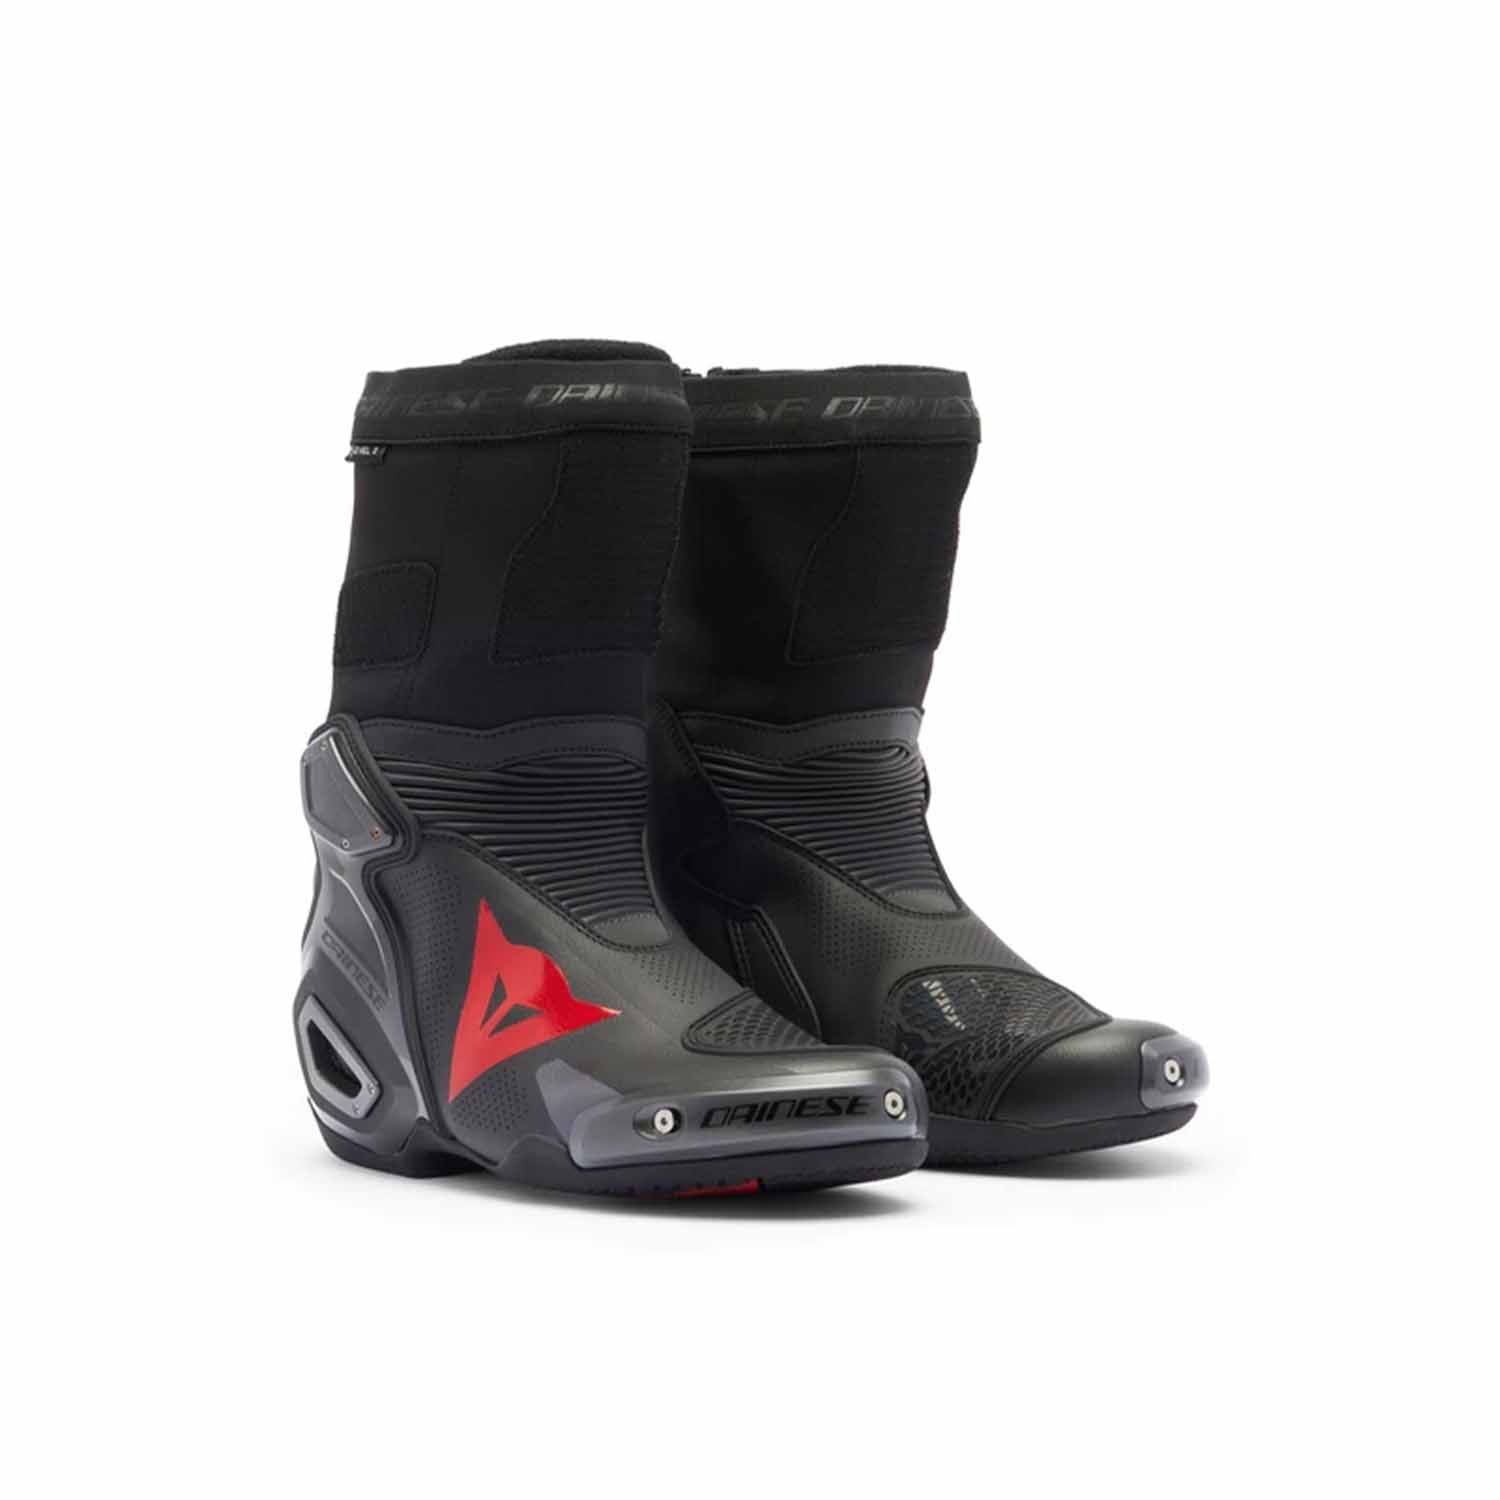 Image of EU Dainese Axial 2 Air Boots Black Black Red Fluo Taille 41